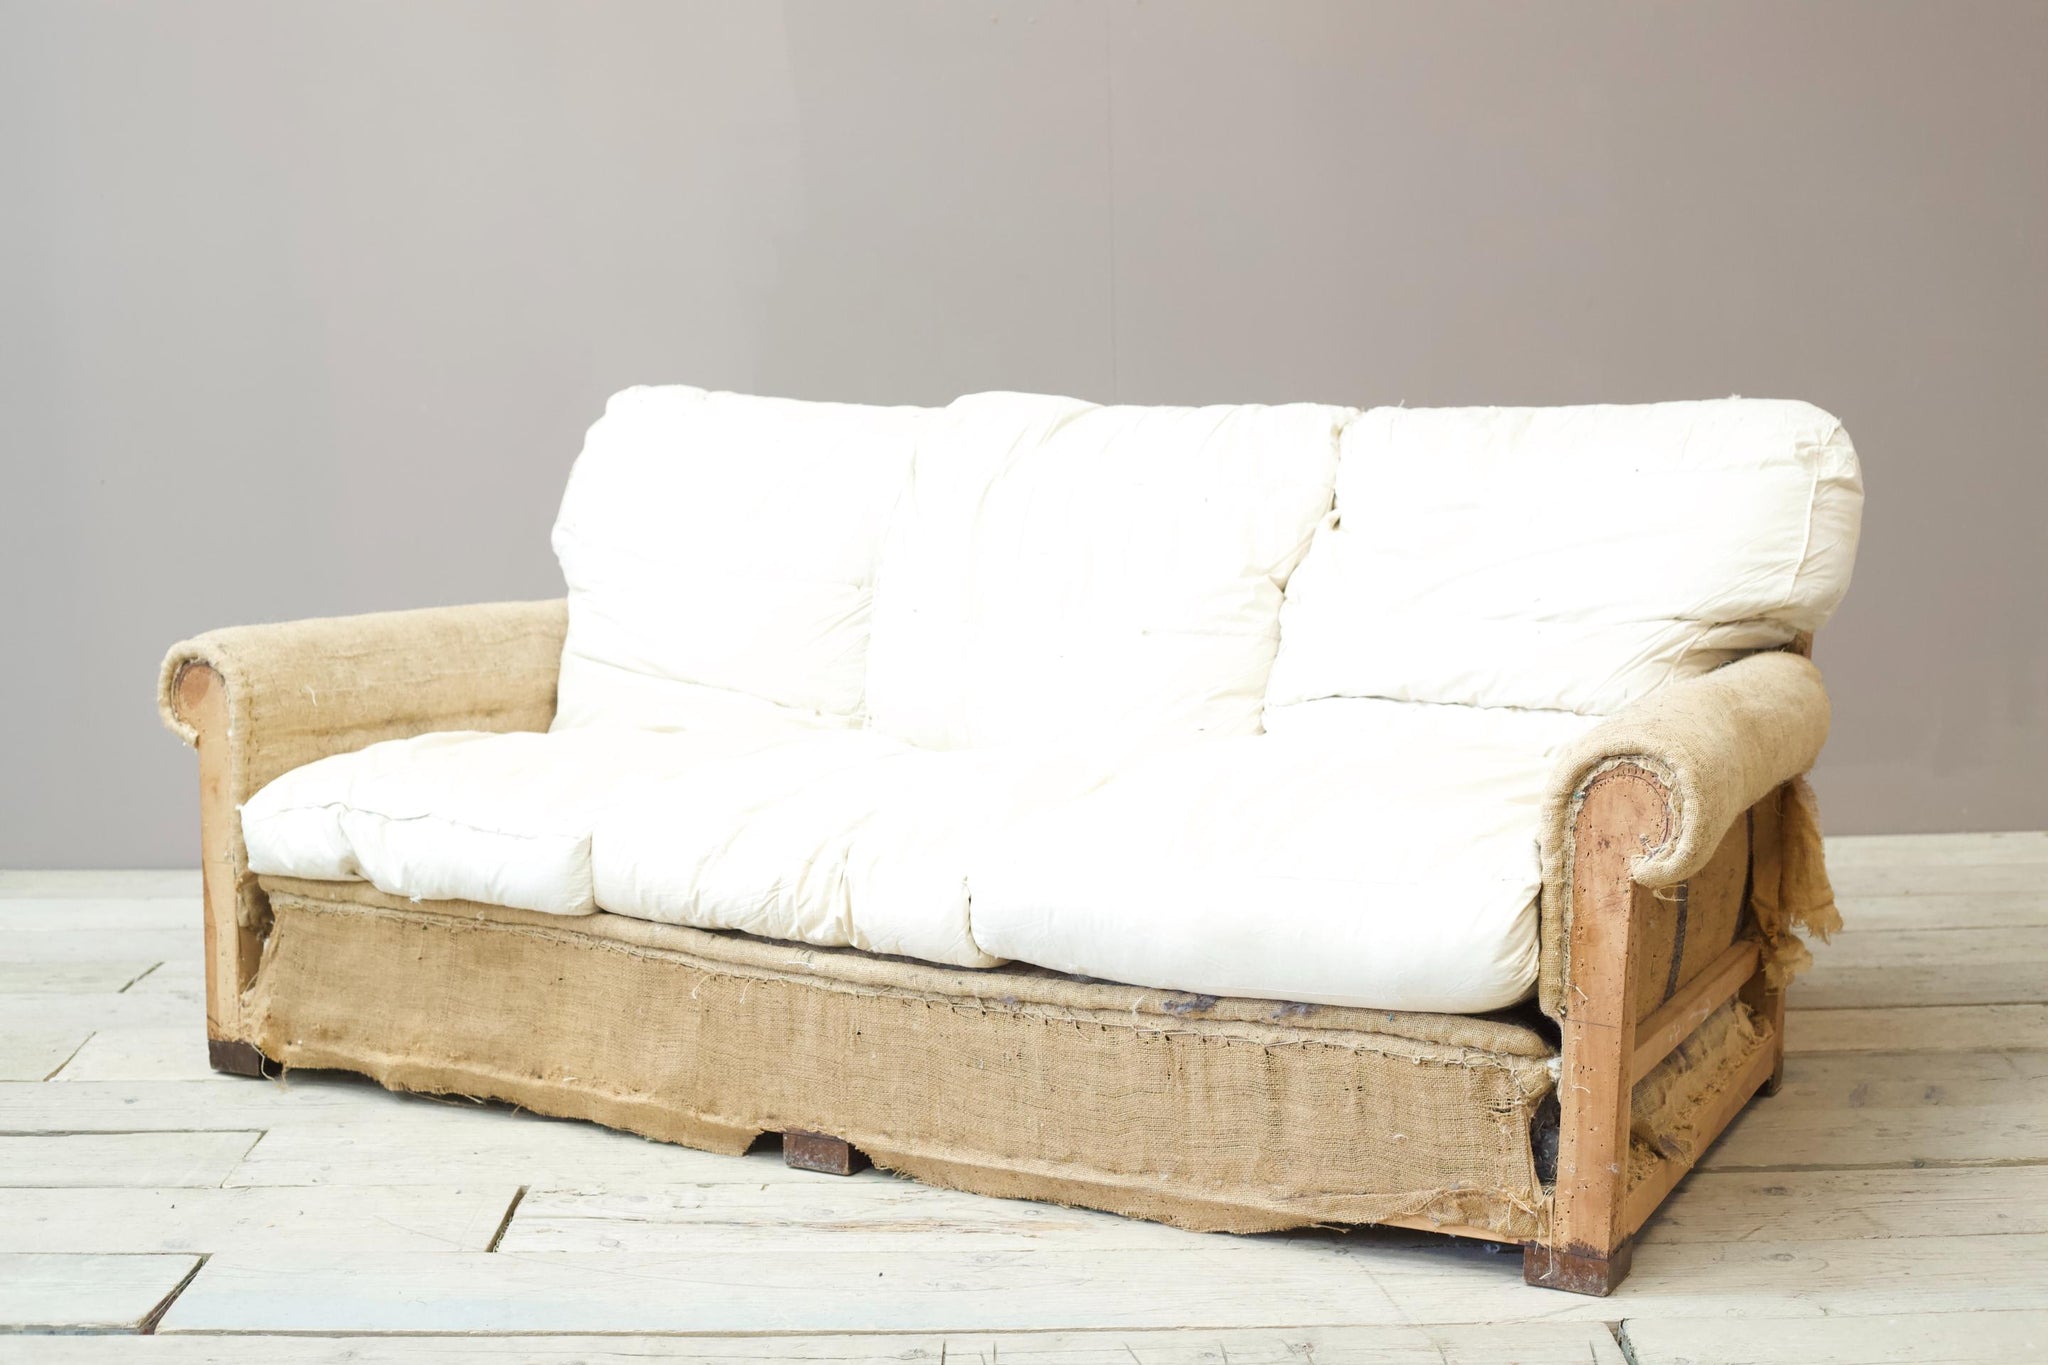 Early 20th century English country house cushioned back sofa